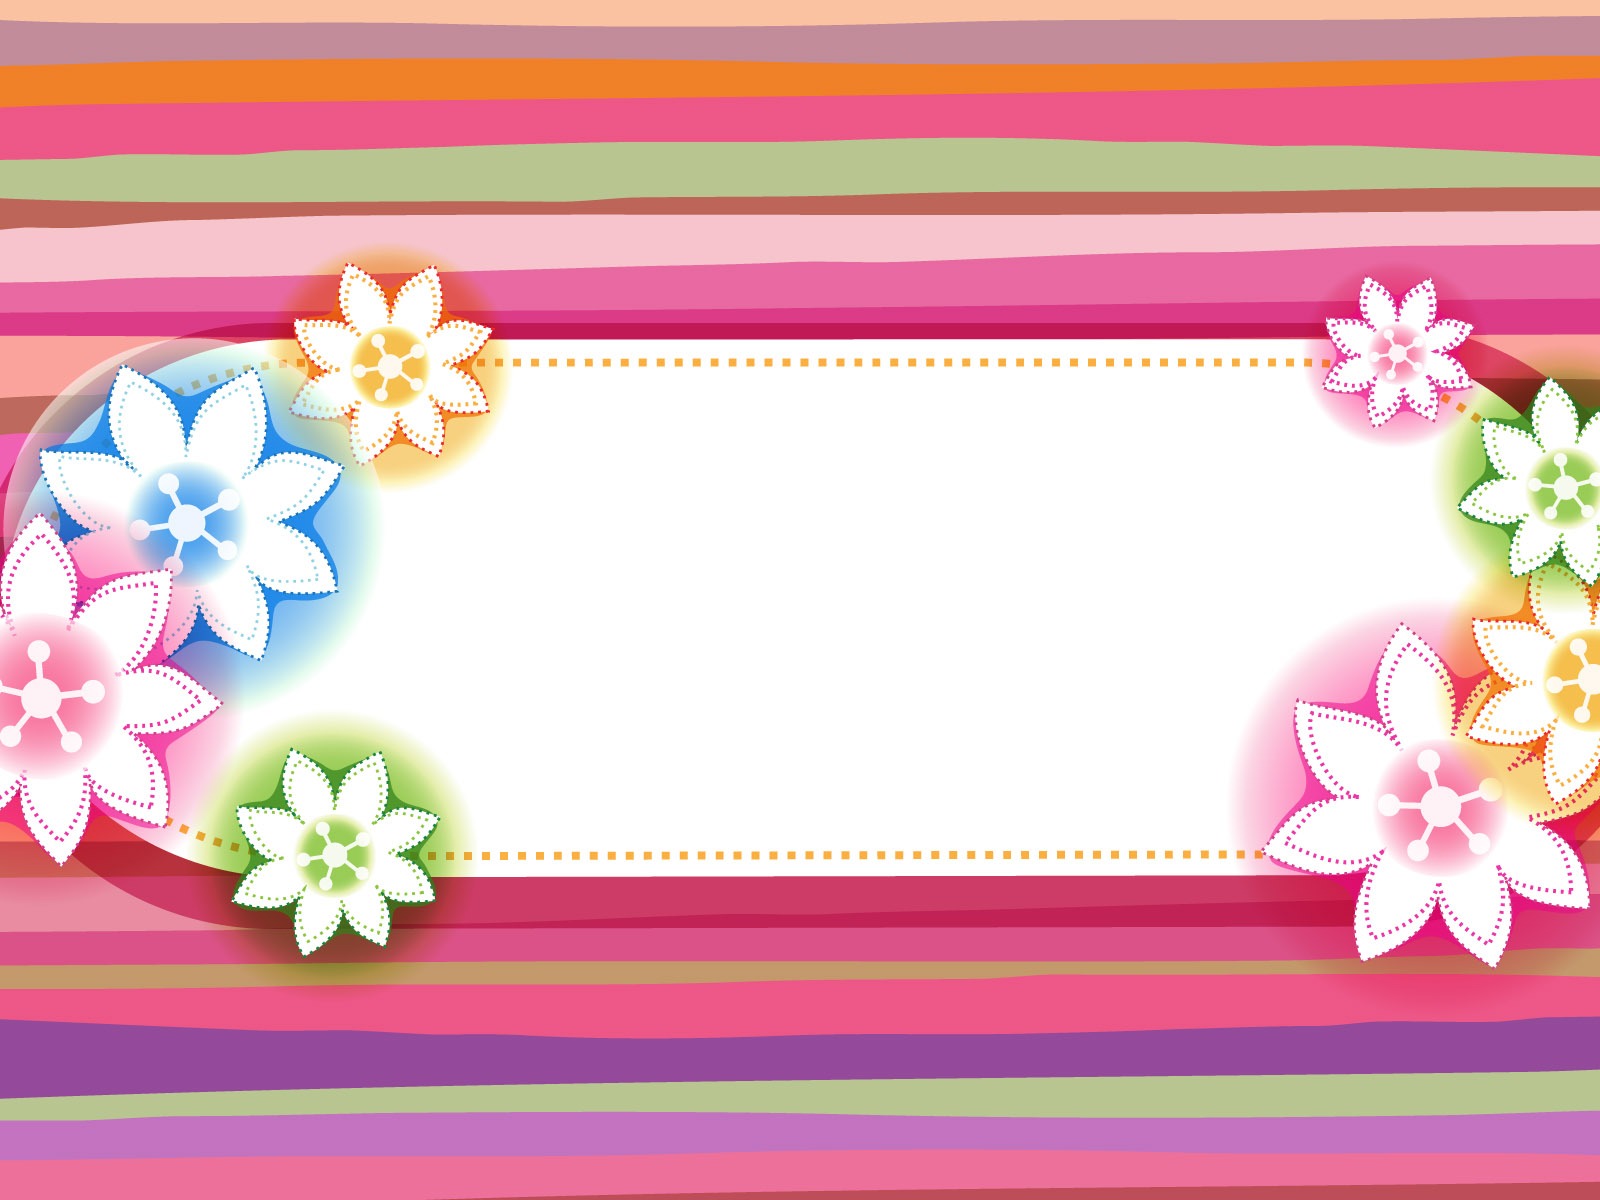 Colorful vector background wallpaper (3) #5 - 1600x1200